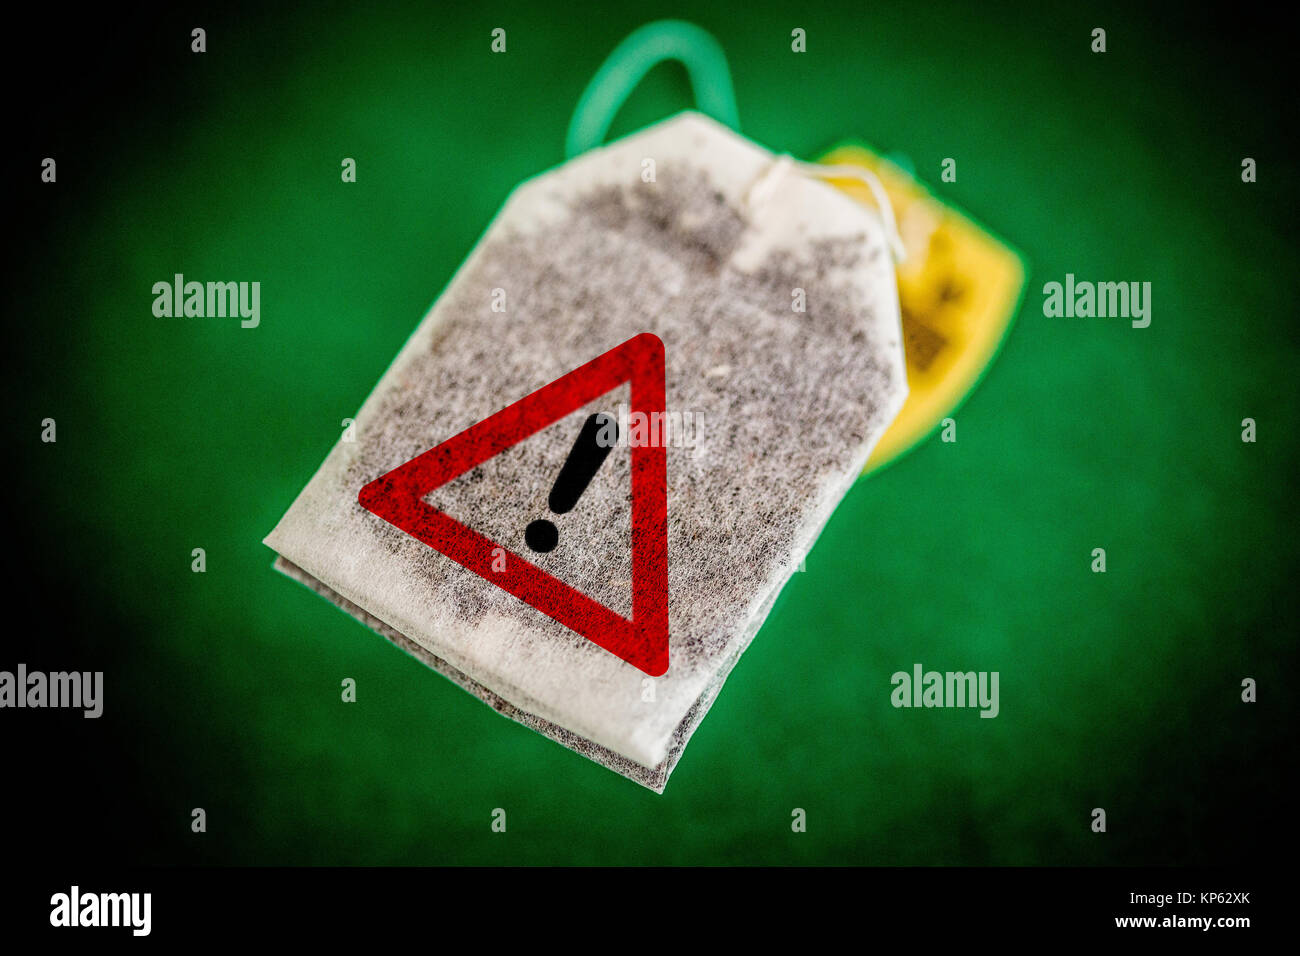 Warning pictogram on a tea bag. Conceptual image of the many pesticides found in tea. Stock Photo